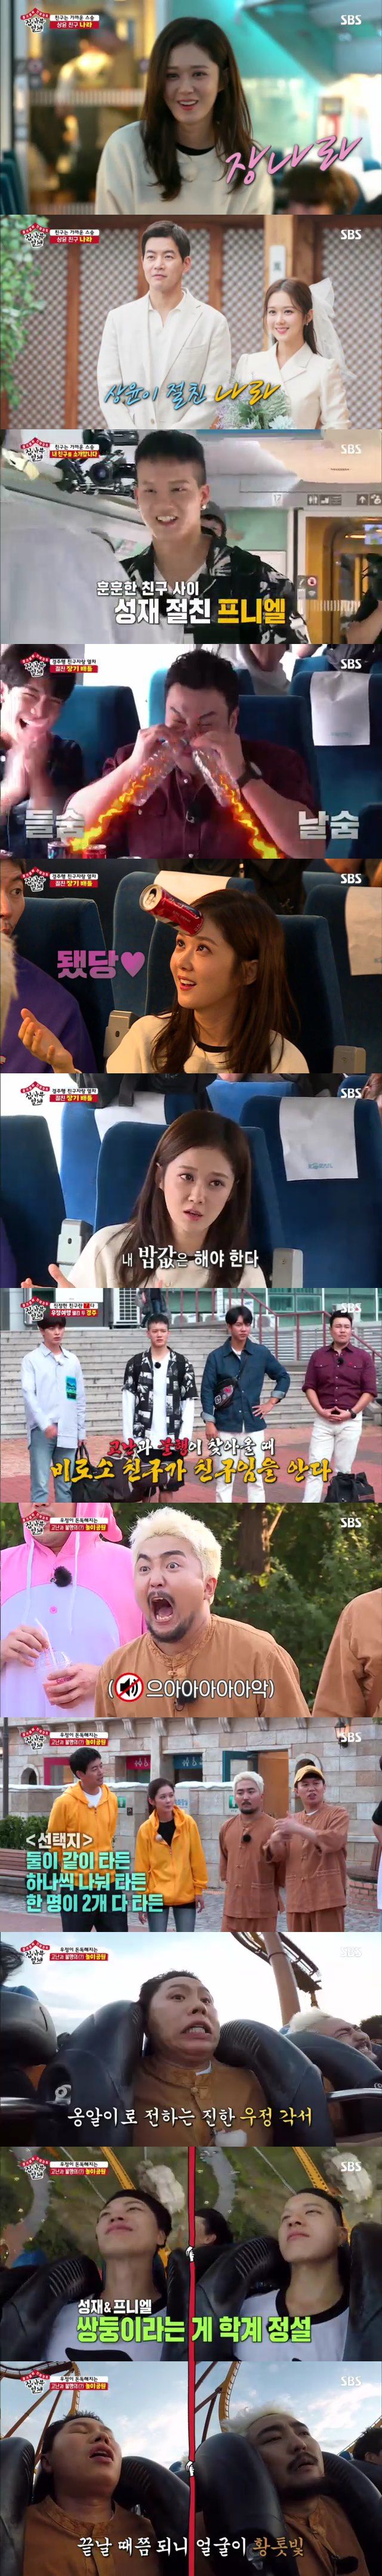 SBS All The Butlers attracted the attention of viewers with a friendship travel special that can look back on the meaning of true Friend.According to Nielsen Korea, SBS All The Butlers furniture TV viewer ratings were 7.3% (hereinafter the second part of the metropolitan area) and 2049 target TV viewer ratings, which were collected for young viewers aged 20 to 49, recorded 3.7%.Top TV viewer ratings per minute soared to 8.4 per cent.The broadcast was featured in the Friend Master feature, and a moisturizing trip to Gyeongju was drawn with friends invited by Lee Seung-gi, Lee Sang-yoon, Yang Se-hyeong and Yook Sungjae.The members invited Friend, who had many things to learn most about each, to say of Friend, whom Lee Sang-yoon invited, The personality is not insane.I am serious, he said. I am a friend with a lot of talent in various fields.As the question of who the invited friend would be, Actor Jang Na-ra, the friend of Lee Sang-yoon, first appeared and led the cheers of the members.Jang Na-ra said: I was a bit serious and not funny, so I was not good at performing, but (Lee Sang-yoon) told me not to worry.I said I would take care of everything. Then Jang Na-ra said to Lee Sang-yoon, who is breathing in the drama VIP scheduled to be broadcast, It feels like this boss on our team.I am doing my best and it is the funniest in our team. Followed by Friend Yoo Byung-jae in Yang Se-hyeong, Friend Actor Shin Seung-Hwan in Lee Seung-gi, and Friend Bitobi Peniel Shin in Yook Sungjae.Lee Seung-gi said that Shin Seung-Hwans advantage was a good catcher.Shin Seung-Hwan showed off his organs by blowing a PET bottle with his nose and attaching a can to his forehead as a nickname of Jung Seung-hwan.However, Yoo Byung-jae also easily blew a PET bottle with his nose, followed by Jang Na-ra, who succeeded in two organs and intercepted everyones applause.In the meantime, Jang Na-ra handed out his favorite snack, the sweetened jelly, to the members. Lee Sang-yoon added, I ate this only the day I filmed.Yoo Byung-jae asked, I have been close to 20 years and I am still nervous, and Jang Na-ra replied, The more you do, the worse you get.Lee Sang-yoon, who watched Jang Na-ra, said, Jang Na-ra is always very sorry when I NG, and Jang Na-ra said, I always think that I should pay for my rice and take responsibility.Jang Na-ra said, I will have the capacity and role I expect while casting, but I am always nervous that I will not be able to do it.The crew introduced the members and friends who arrived at the race to the Friend knows that Friend is Friend only when hardship and misfortune come of the proverb about Friend.The members were worried about the mission to be given in the future, and Yang Se-hyeong explained the Chinese character of Danger and said, It may be Danger or an opportunity.So lets think about friendship travel today and think about it in a good way. Since then, they have been wearing a couple of couples shared through friendship tests and visited the amusement park.The mission given at the amusement park was to share two pairs: Roller Coaster, which falls vertically to 90 degrees, and Roller Coaster, which is not foothold.Lee Seung-gi and Shin Seung-Hwan, who won the pre-game, were excluded from the boarding list, while Yook Sungjae and Peniel Shin, Yang Se-hyeong and Yoo Byung-jae decided to ride two Roller Coaster together.Meanwhile, Lee Sang-yoon said, In the Indian proverb, Friend is the one who goes with the sadness of Friend. He decided to ride two Roller Coaster alone on behalf of Jang Na-ra, who is highly afraid of heights.Instead, Lee Sang-yoon said, Please replace me if you have a dance and a song after that, and Jang Na-ra responded happily.Following the warm scenes of the two Friends, the scene of Jang Na-ra singing his past hit song Sweet Dream was predicted, and this scene took the best one minute with 8.4% of the TV viewer ratings per minute, as it proved many peoples expectation for Singer Jang Na-ra.